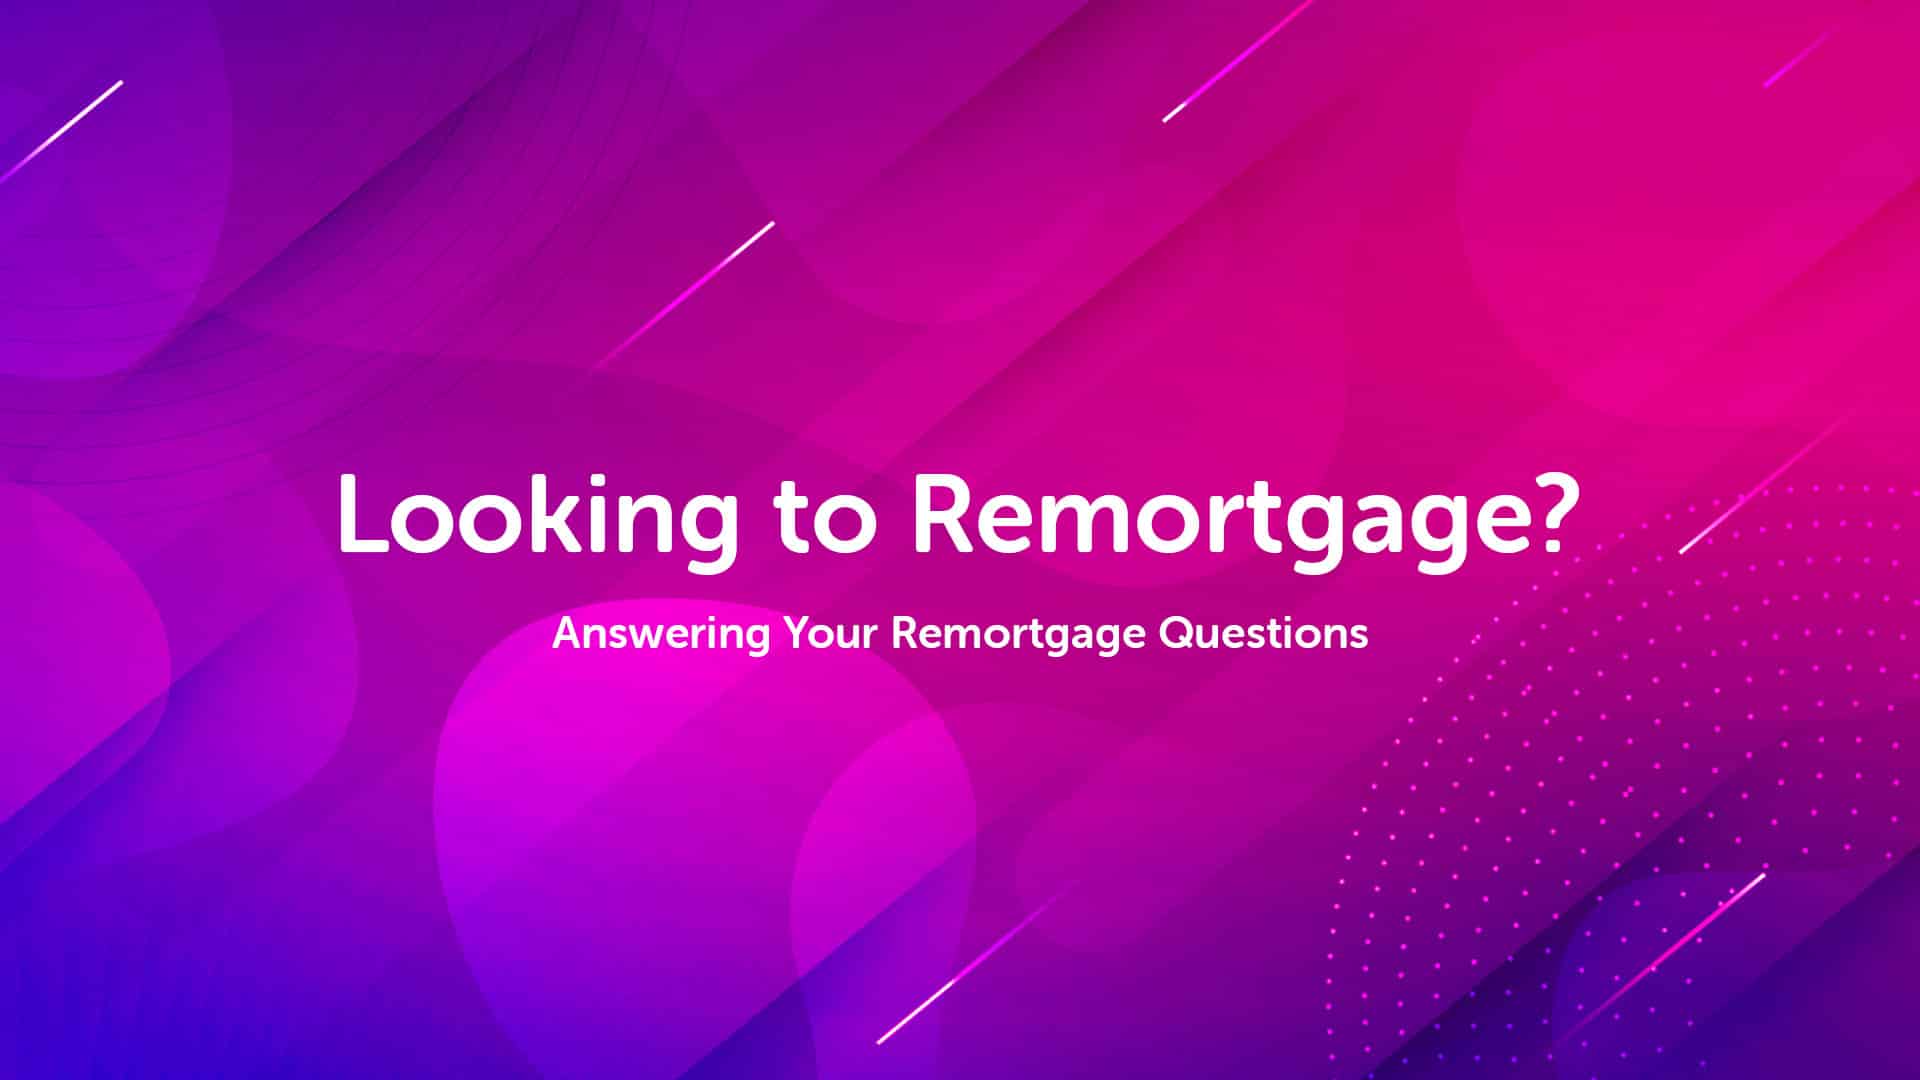 Looking to Remortgage in Manchester